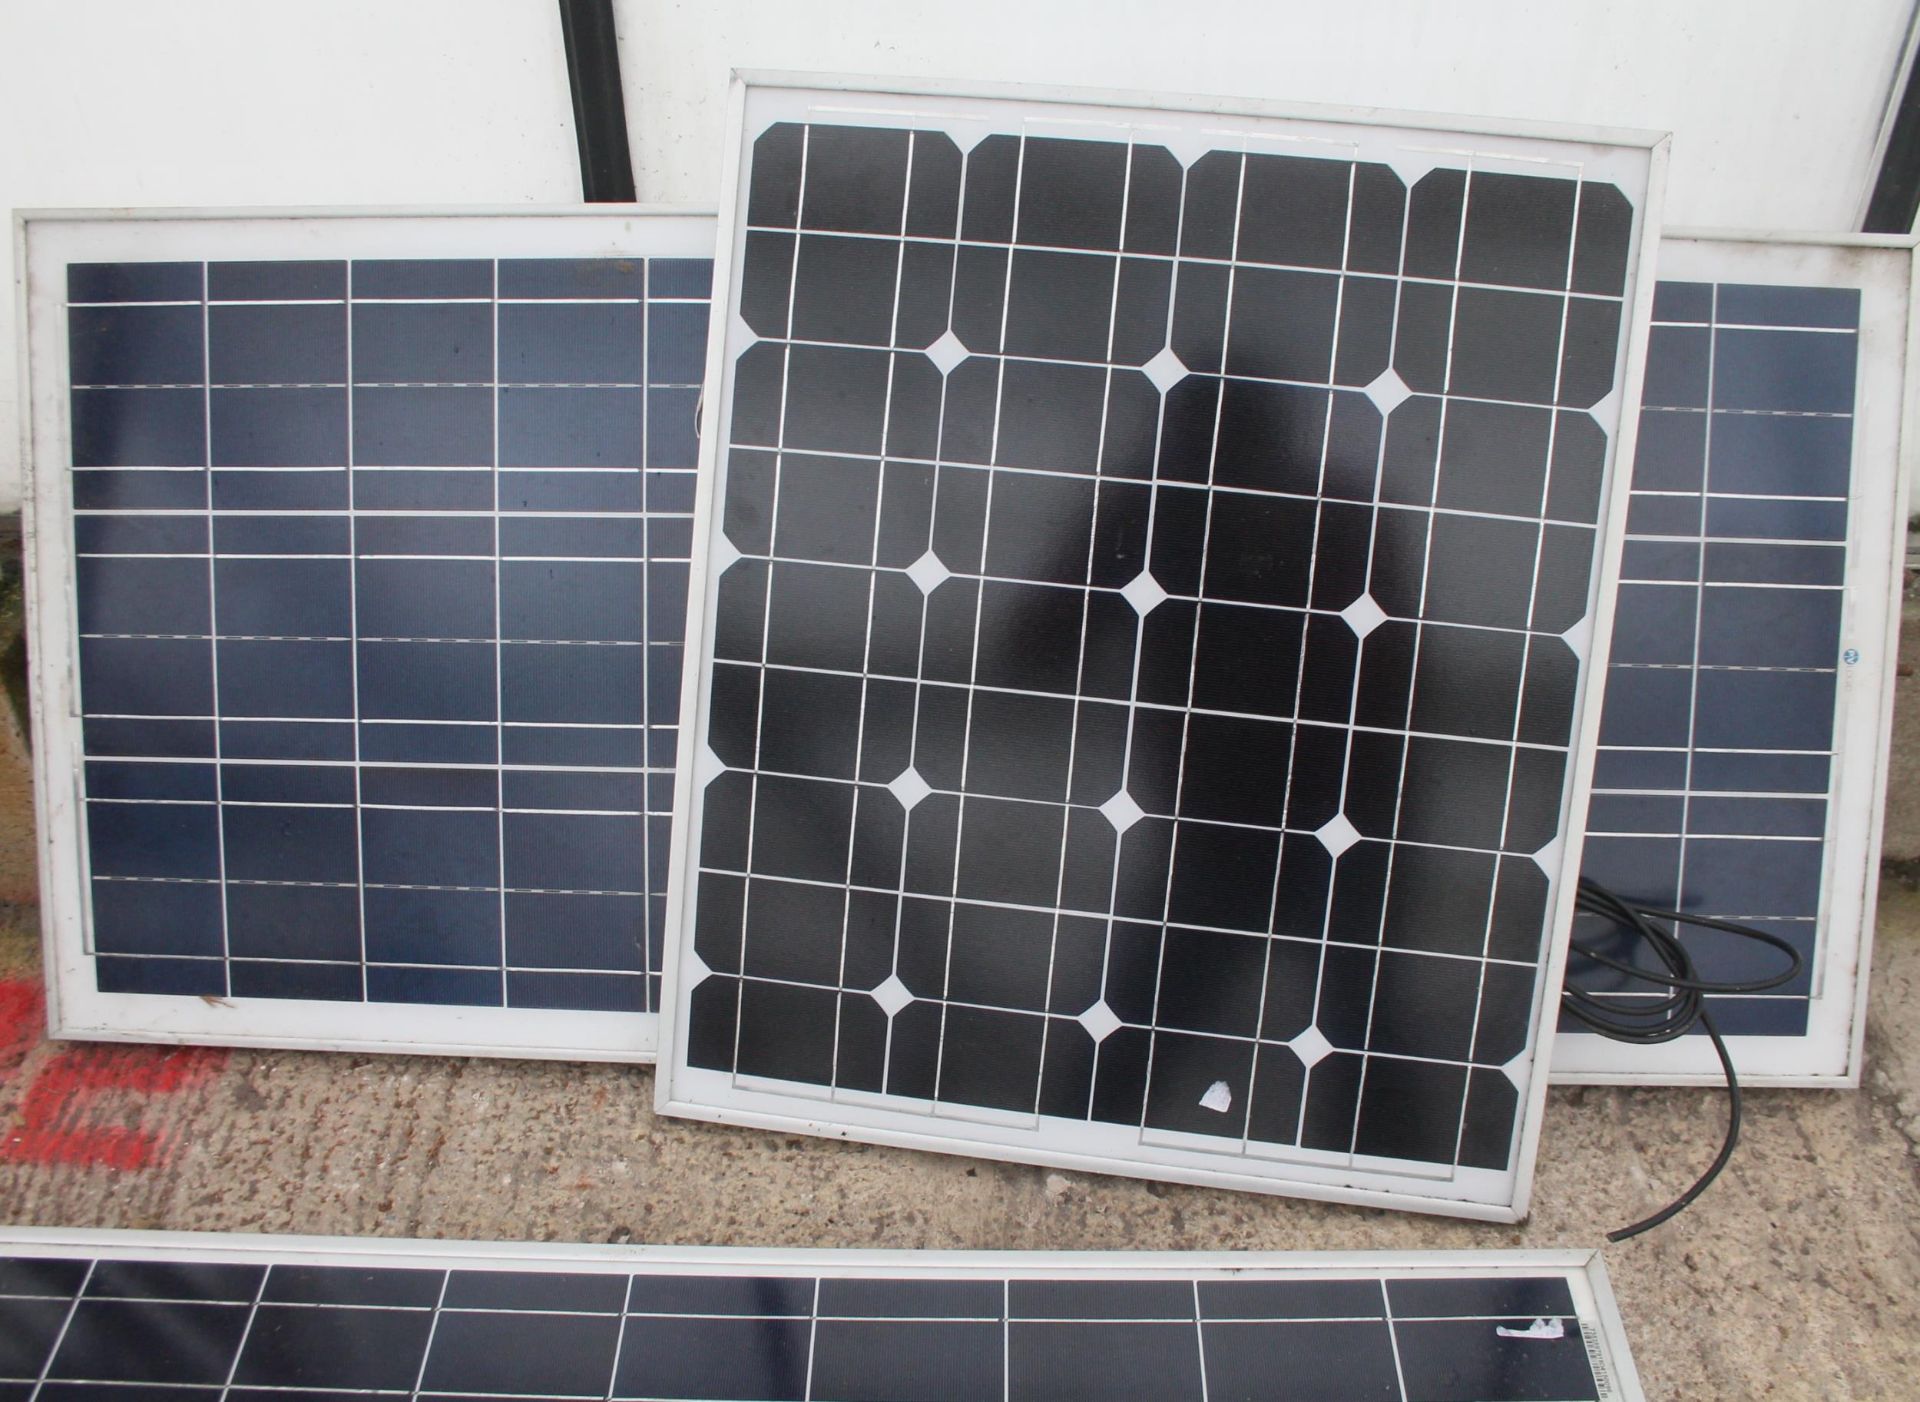 LARGE 80W SOLAR PANEL 91196 X 542 X 35MM, 2 20W PEAL PERFORMANCE SOLAR PANELS 405 X 340 X 25MM EACH, - Image 4 of 4